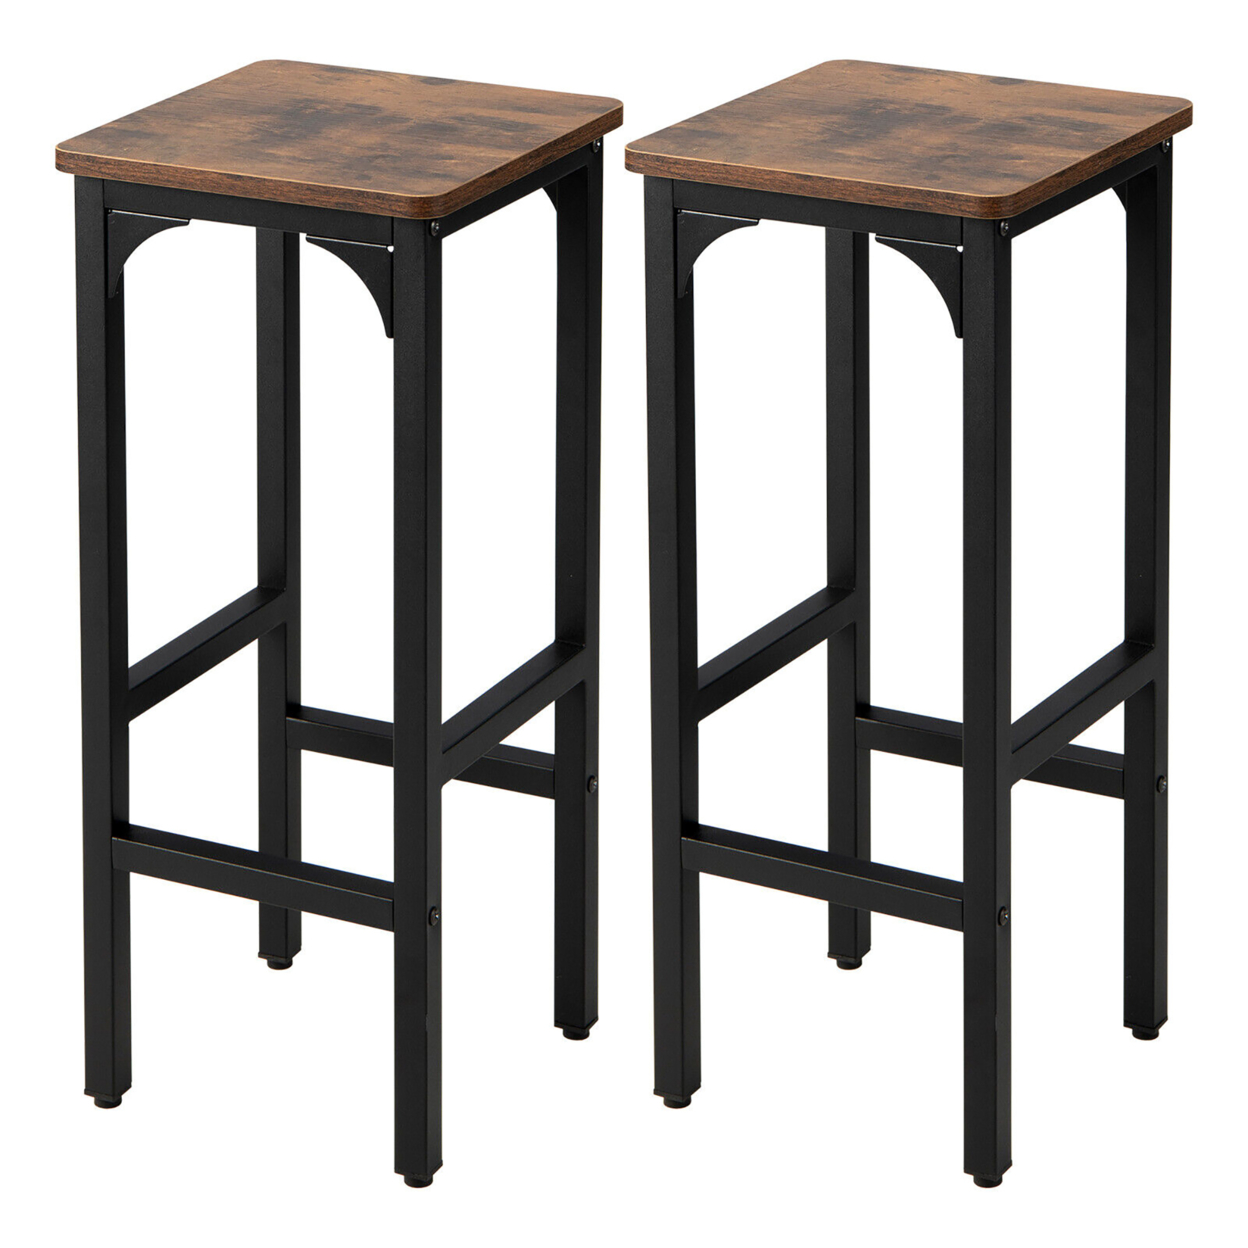 Set Of 2 Industrial Bar Stools 28'' Kitchen Breakfast Bar Chairs Rustic Brown